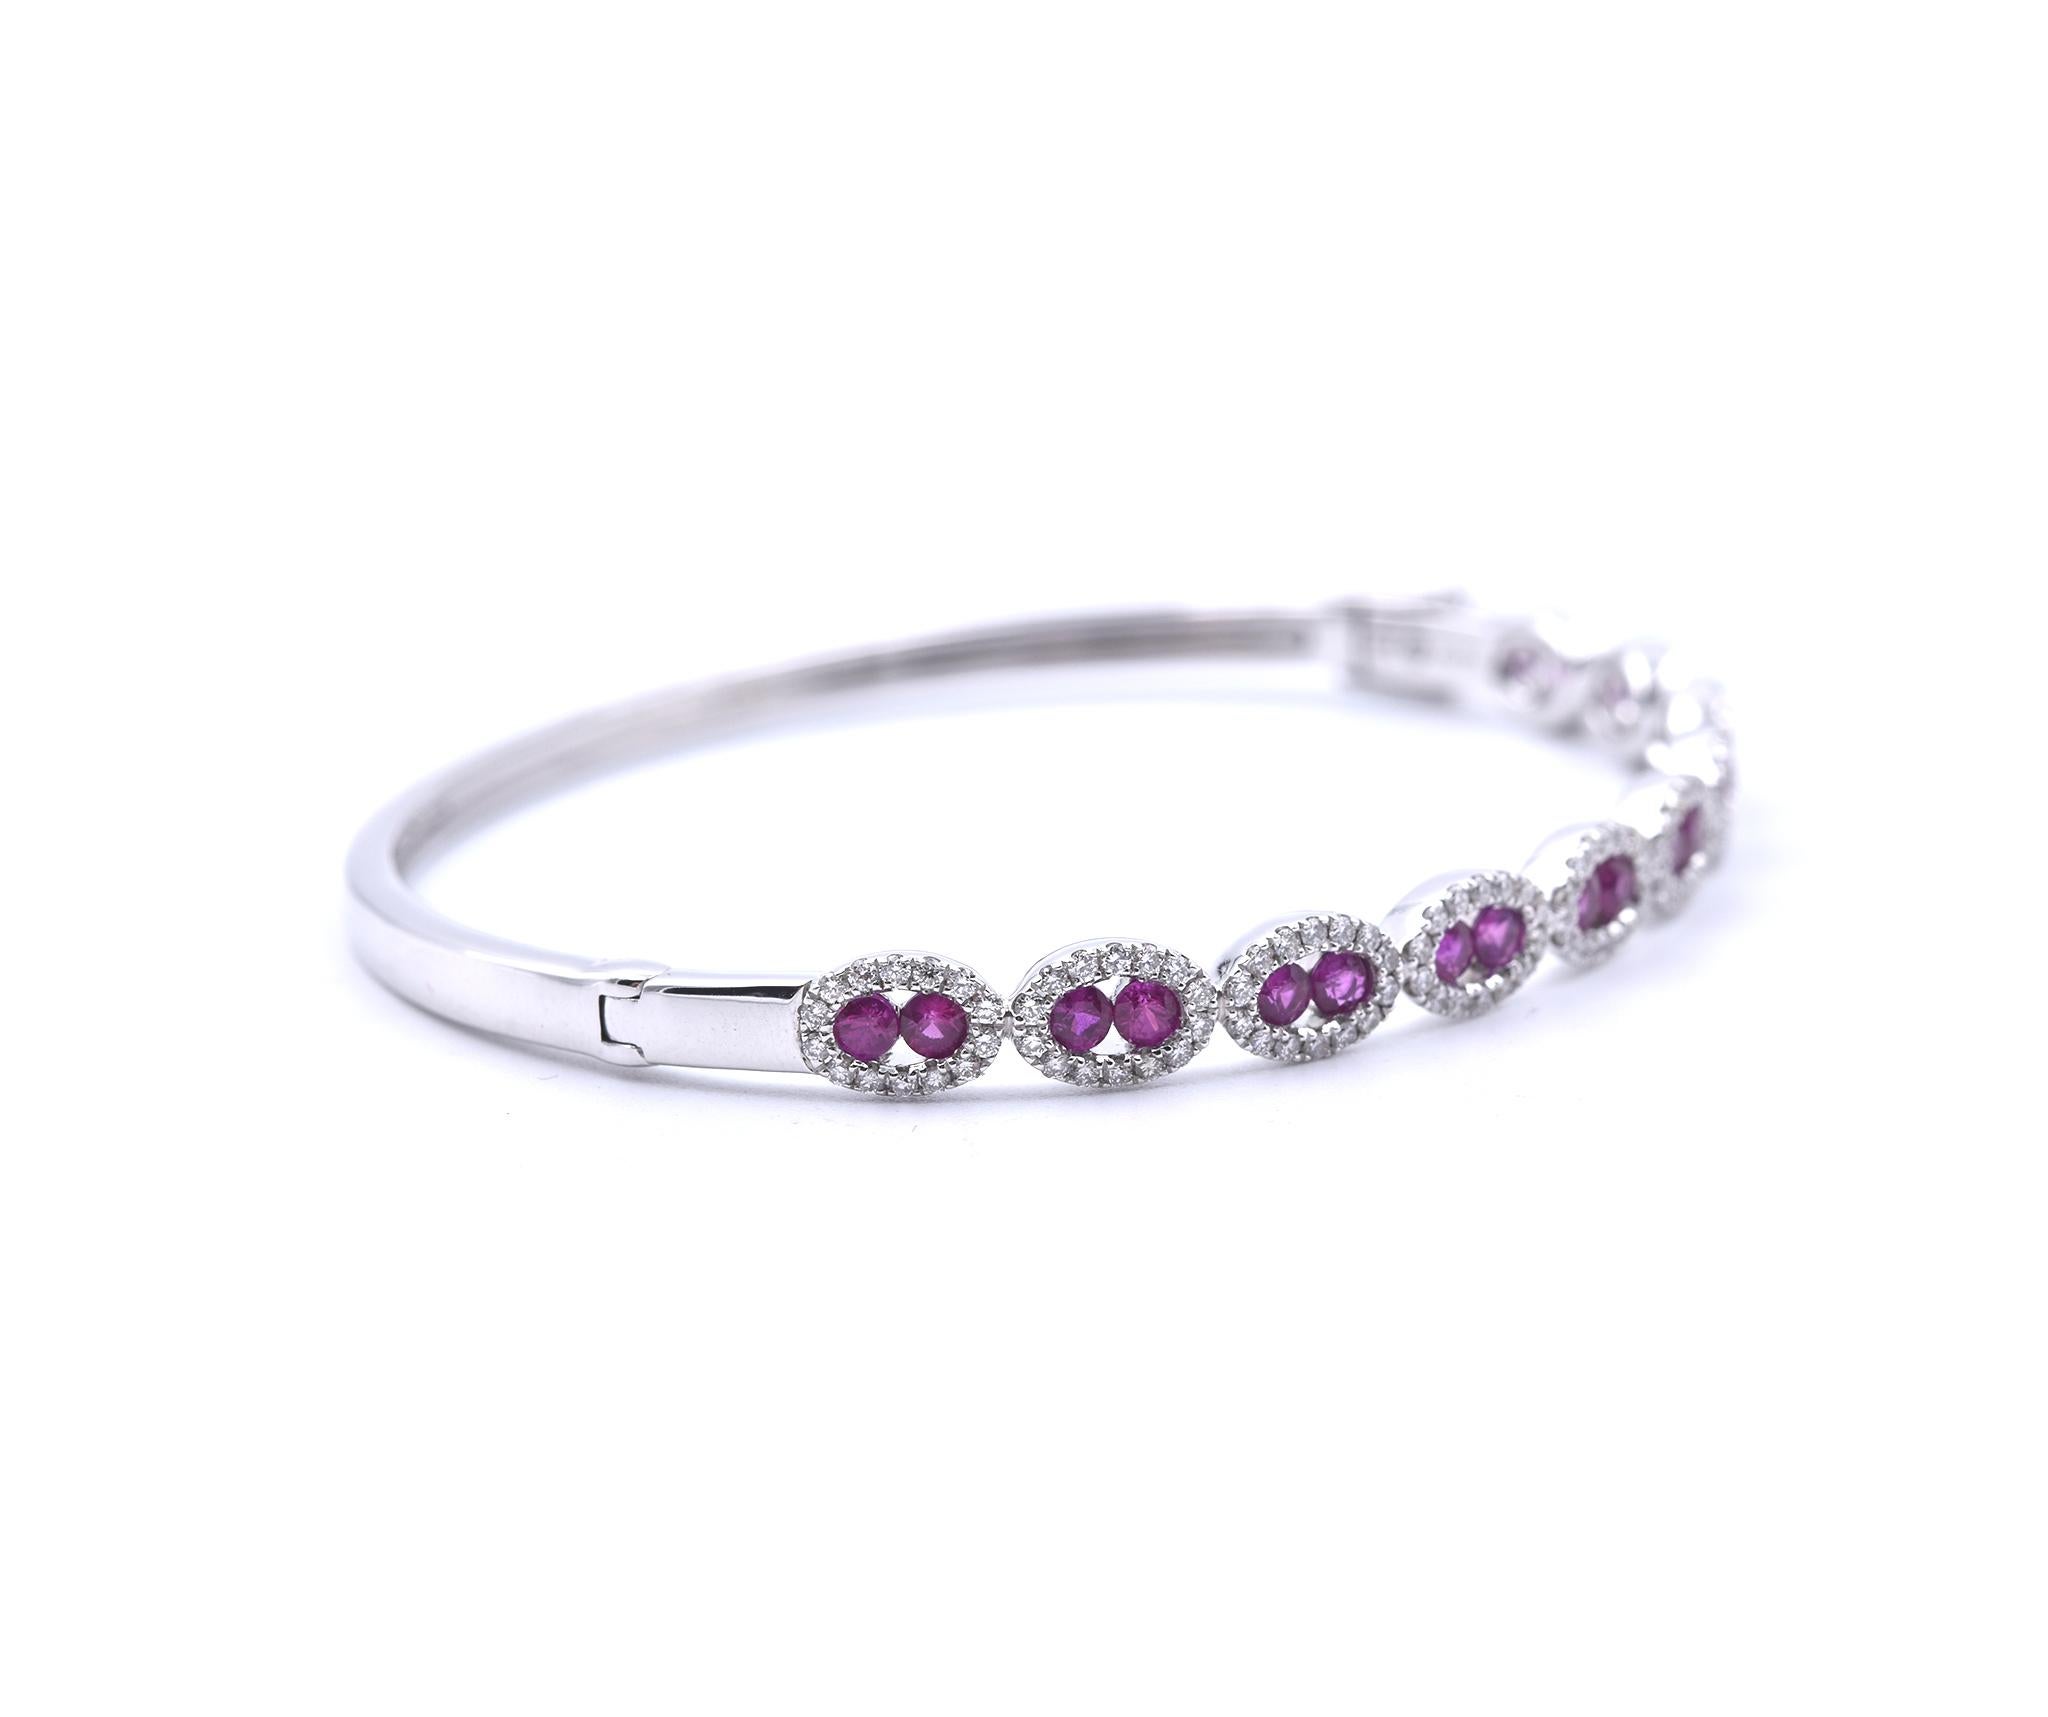 Designer: hallmarked “Fana”
Material: 14k white gold
Rubies: 20 round cut rubies
Diamonds: 140 round brilliant cuts = 0.94cttw
Color: G
Clarity: VS2-SI1
Dimensions: bracelet will fit up to a 7-inch wrist and measures 5.50mm in width
Weight: 14.06